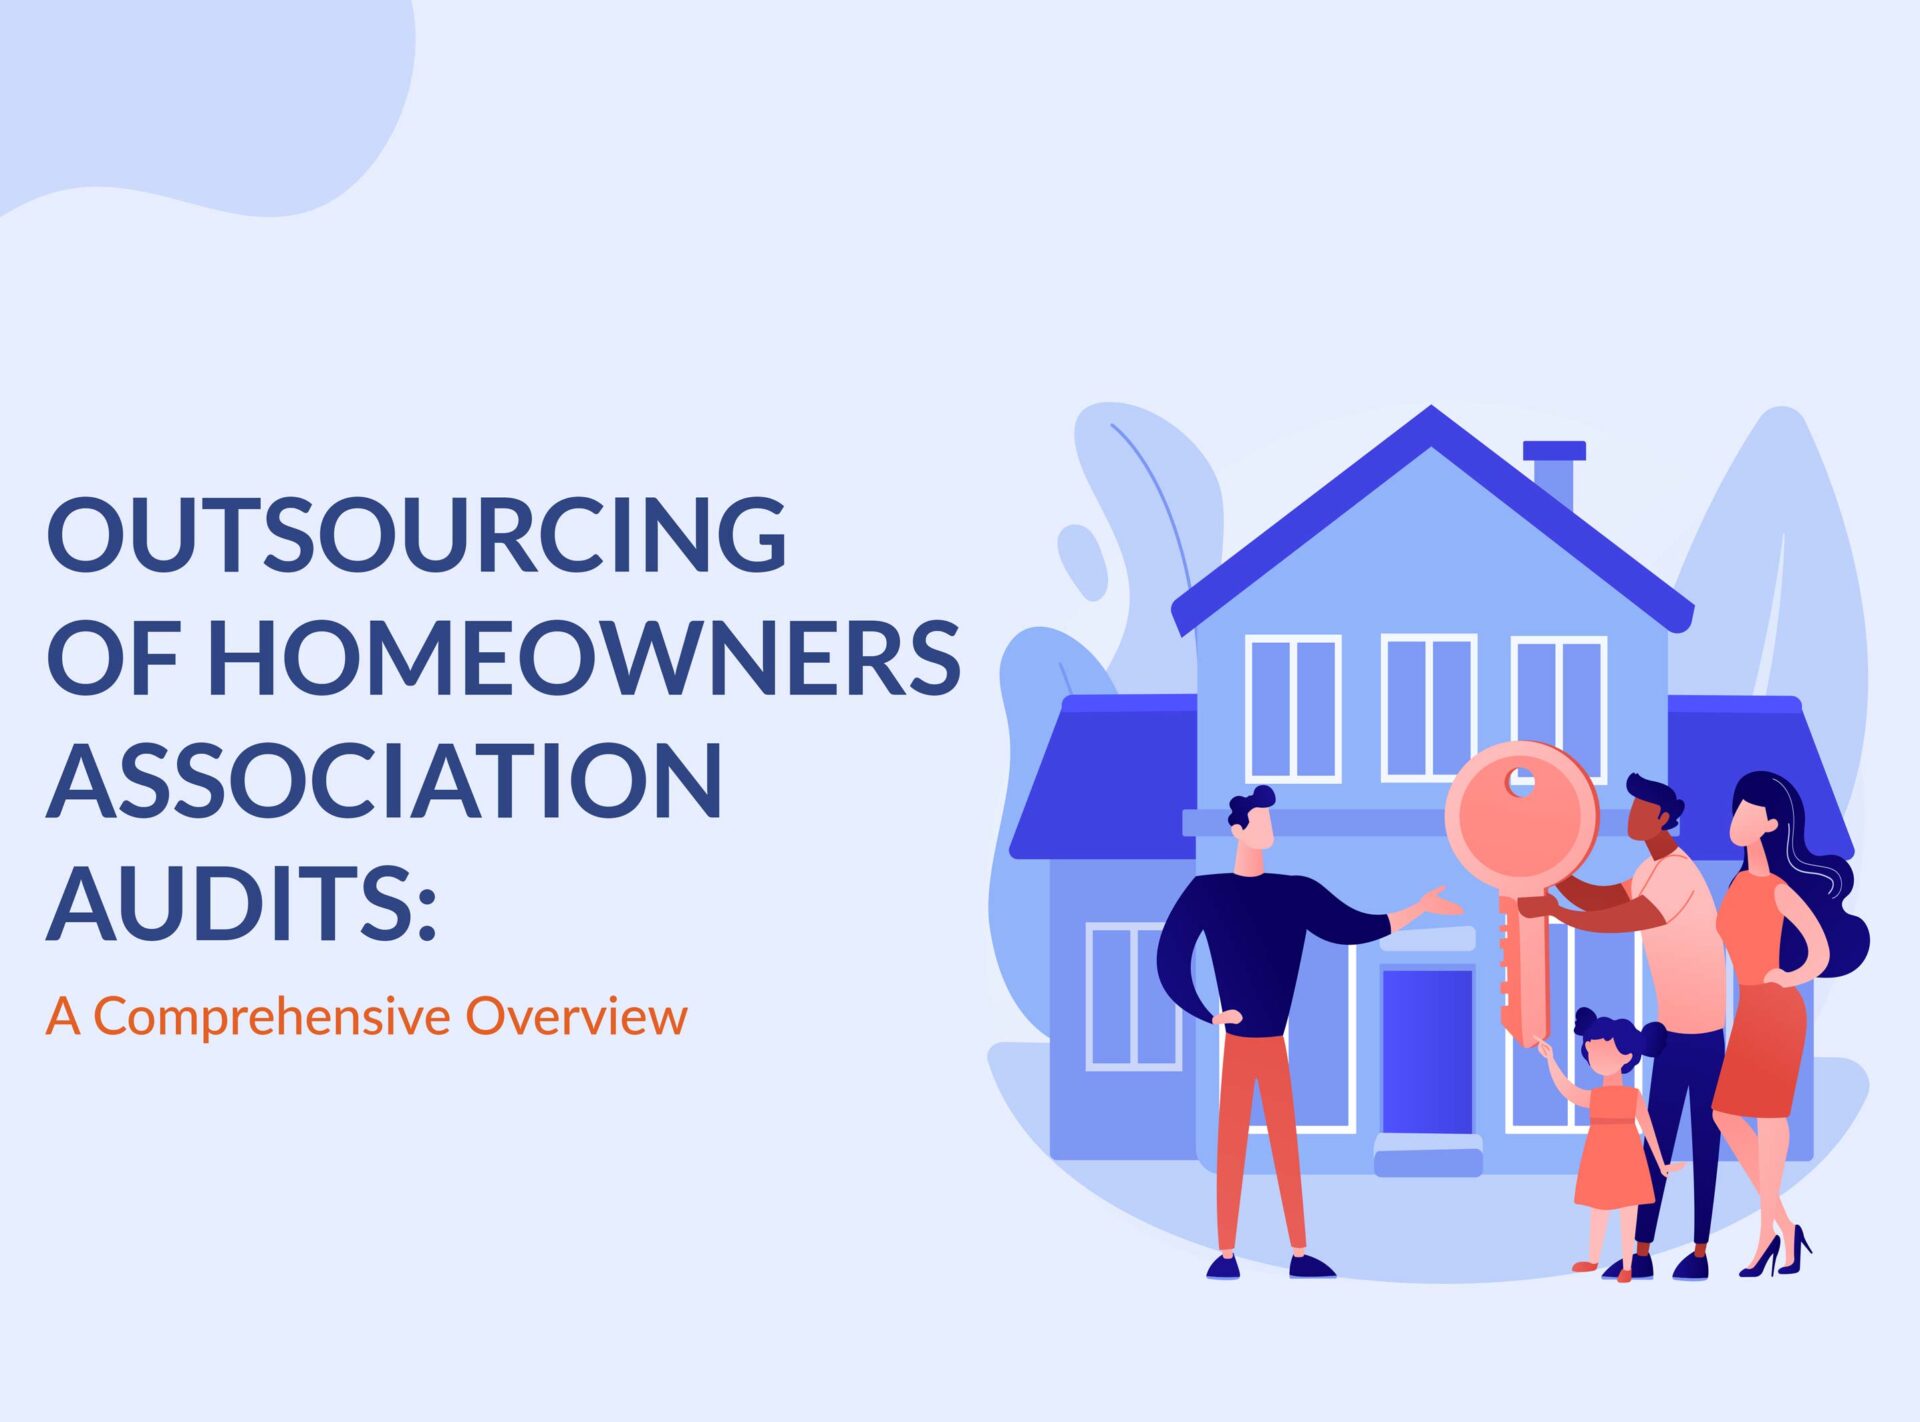 Outsourcing of Homeowners Association Audits: A Comprehensive Overview